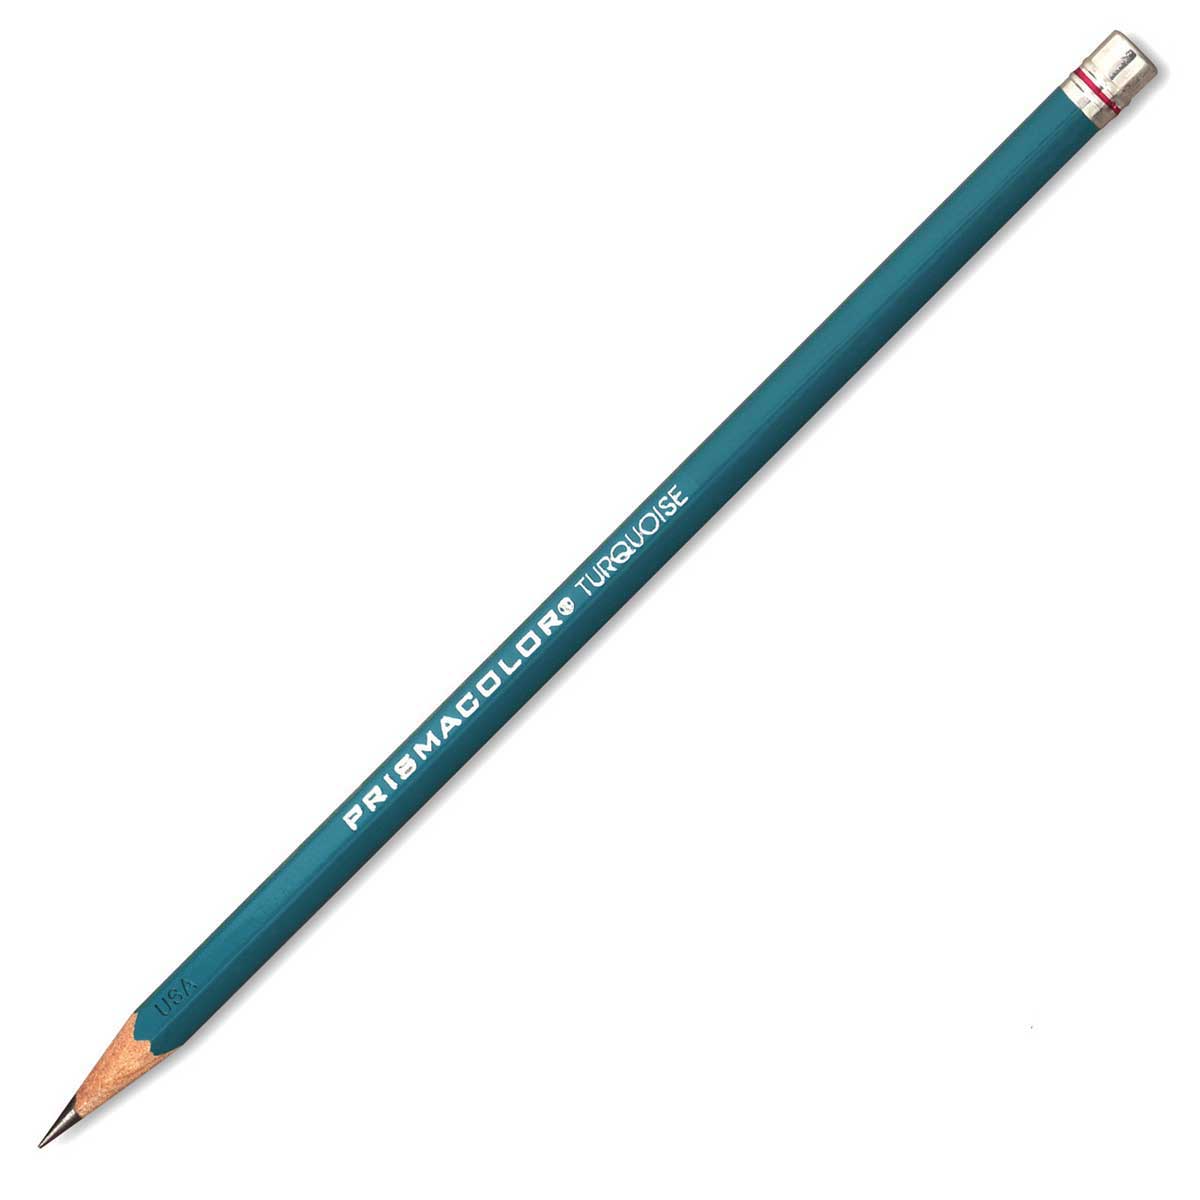 Prismacolor Turquoise Drawing Pencil - 3B